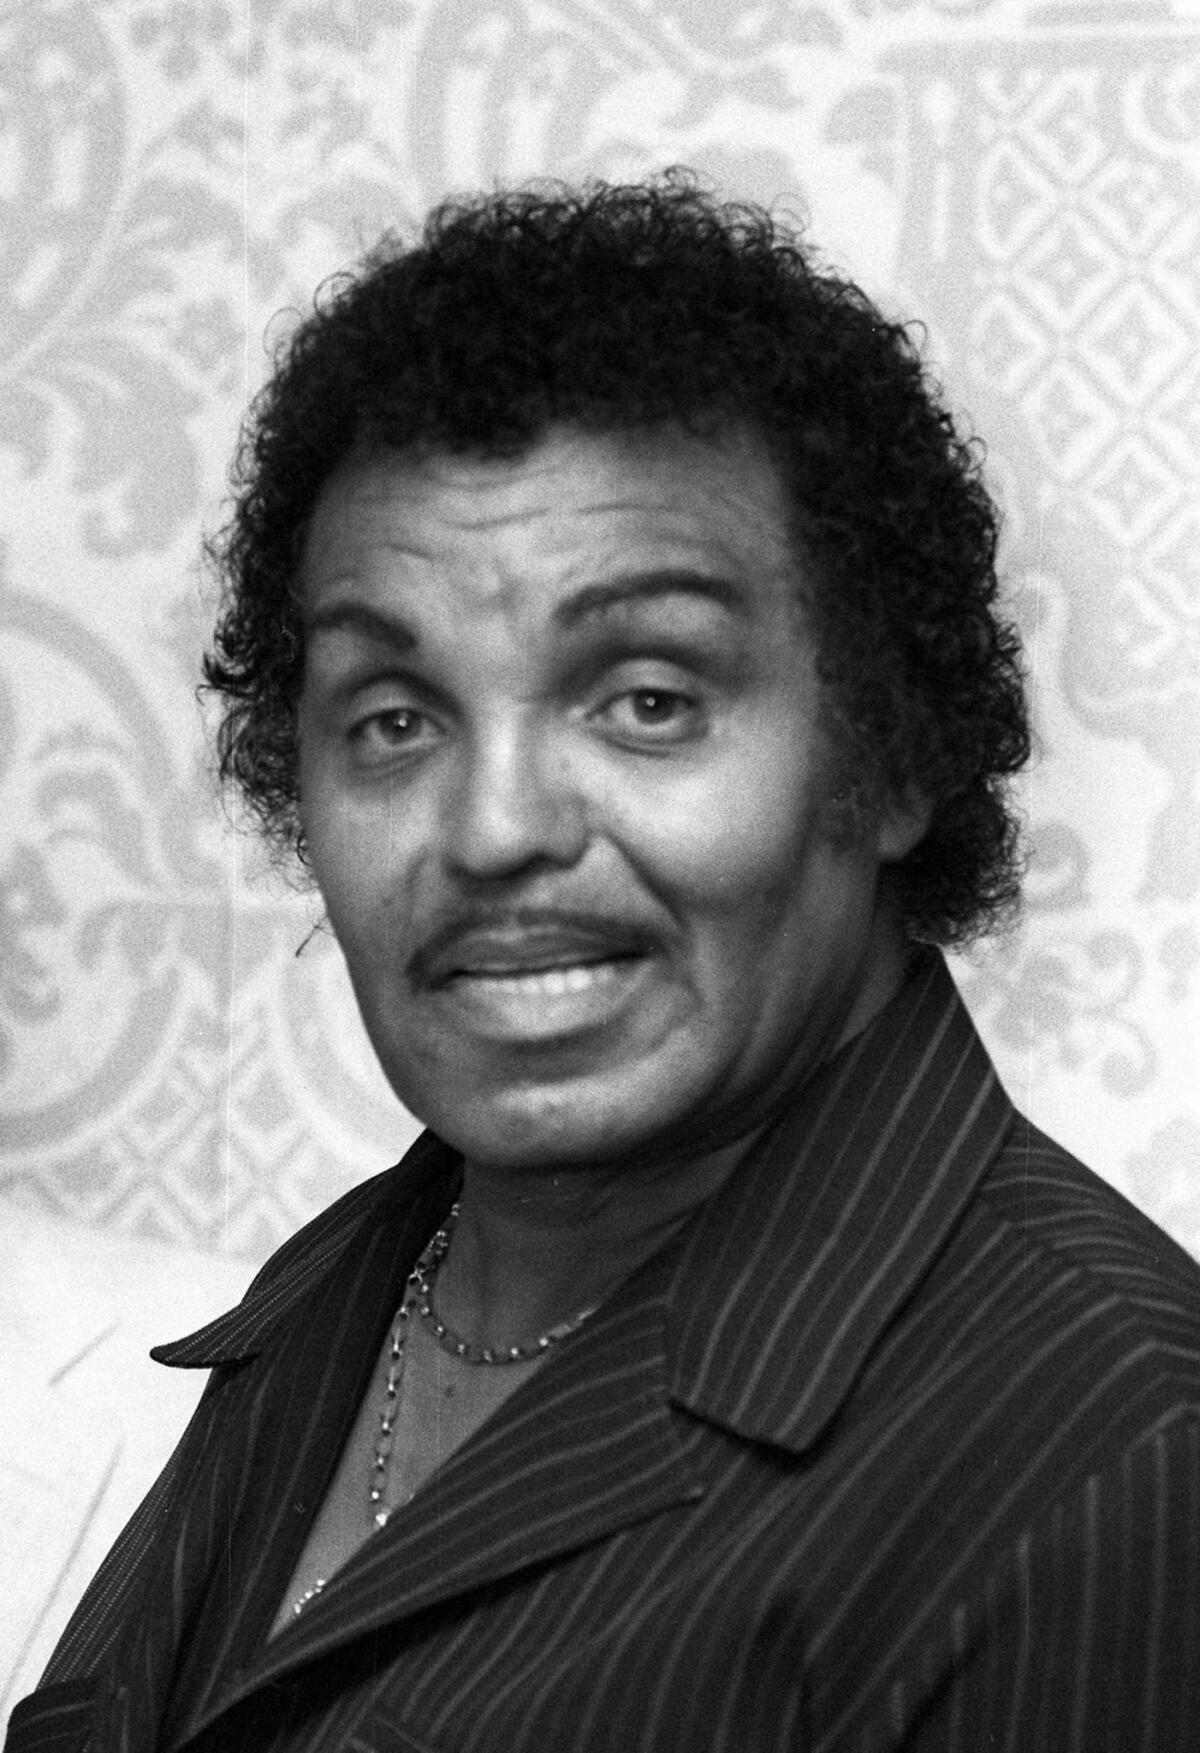 Joe Jackson, shown in July 1984, had been a Golden Glove amateur boxer. His controlling ways drew censure as his children grew more famous.